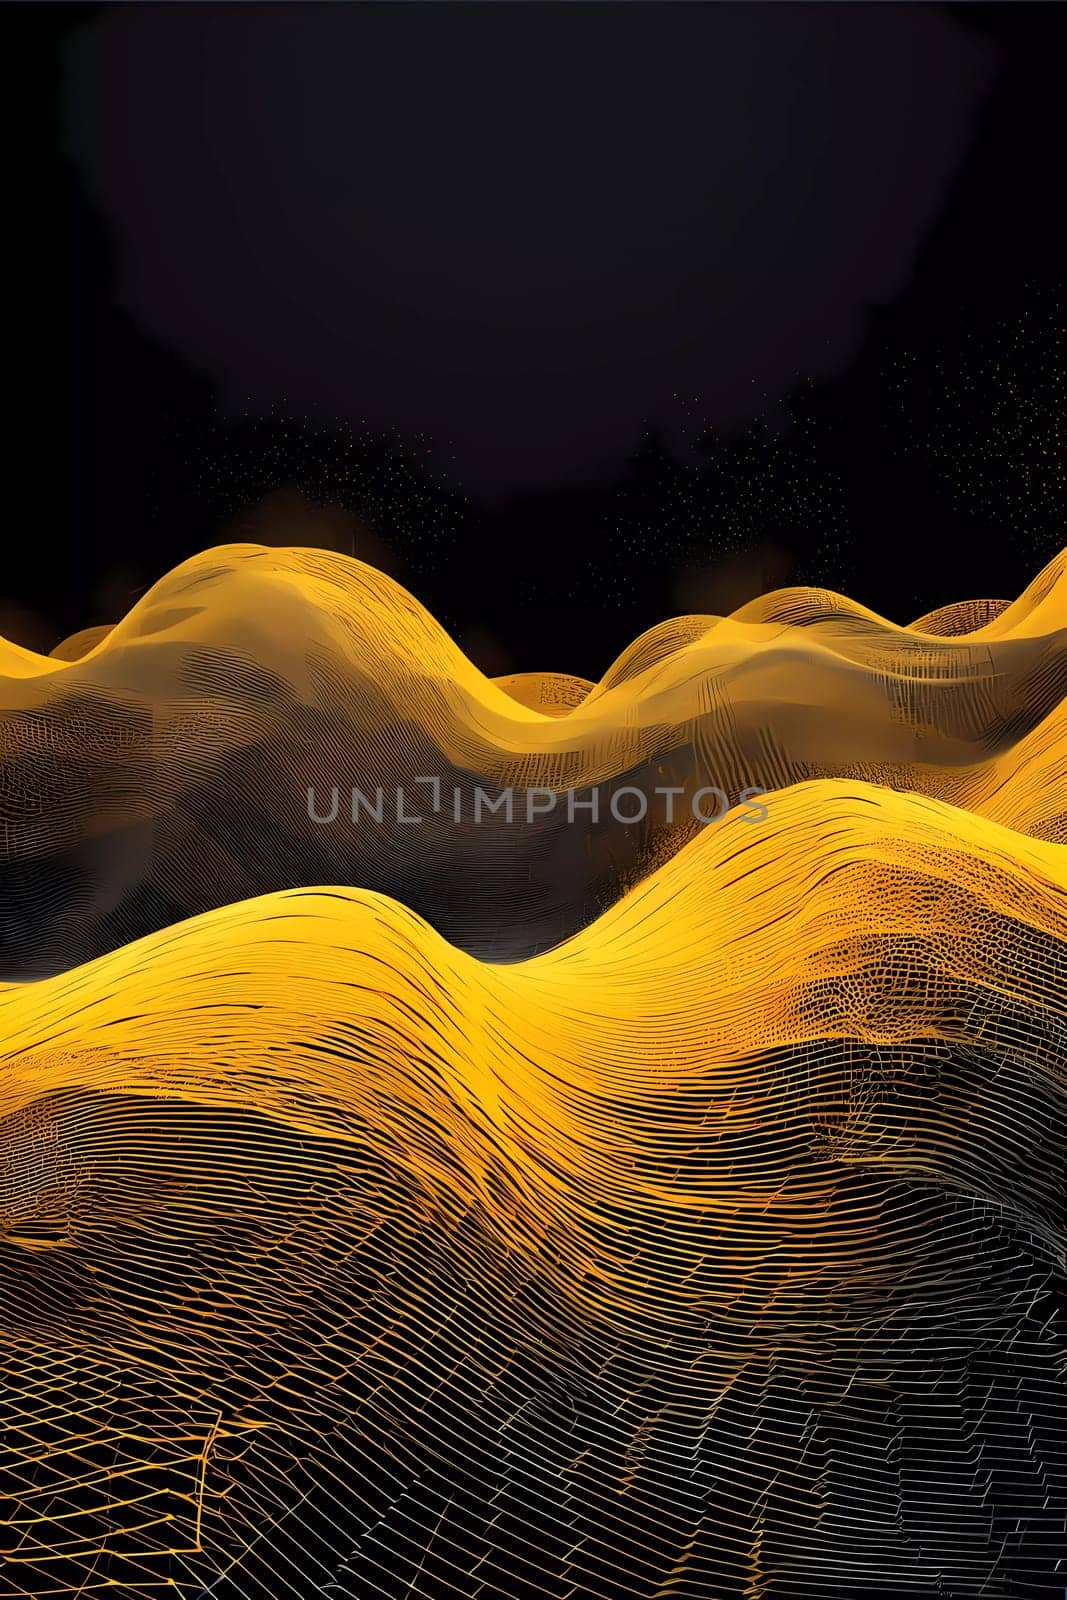 Yellow Wave of dots and weave lines. Abstract background. Network connection structure